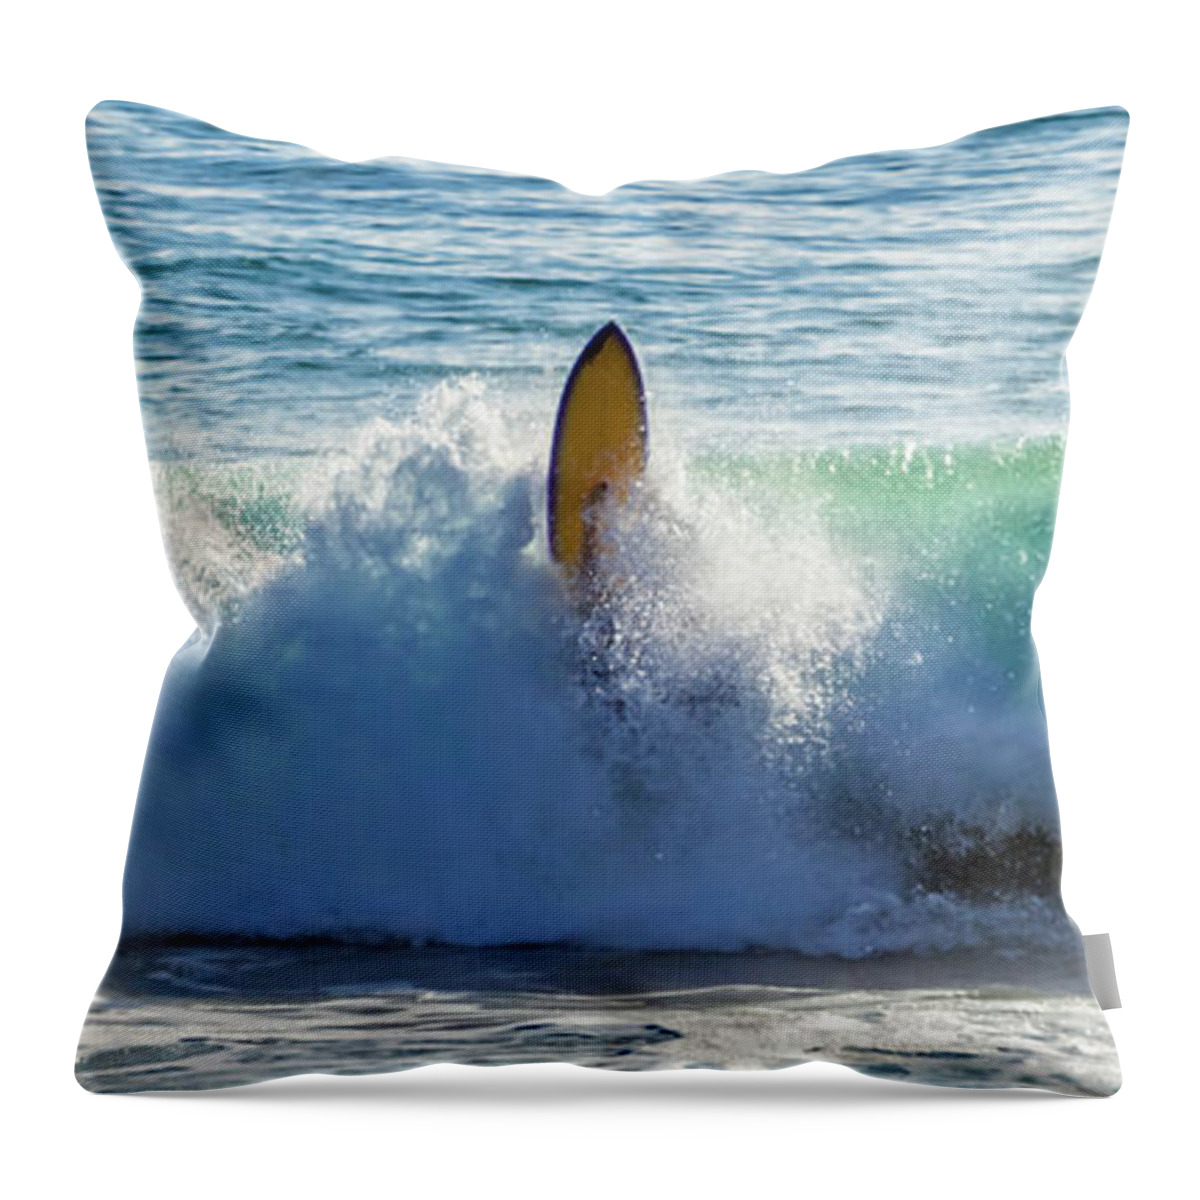 Surf Wipeout Throw Pillow featuring the photograph Wipeout Wave by Chris Spencer